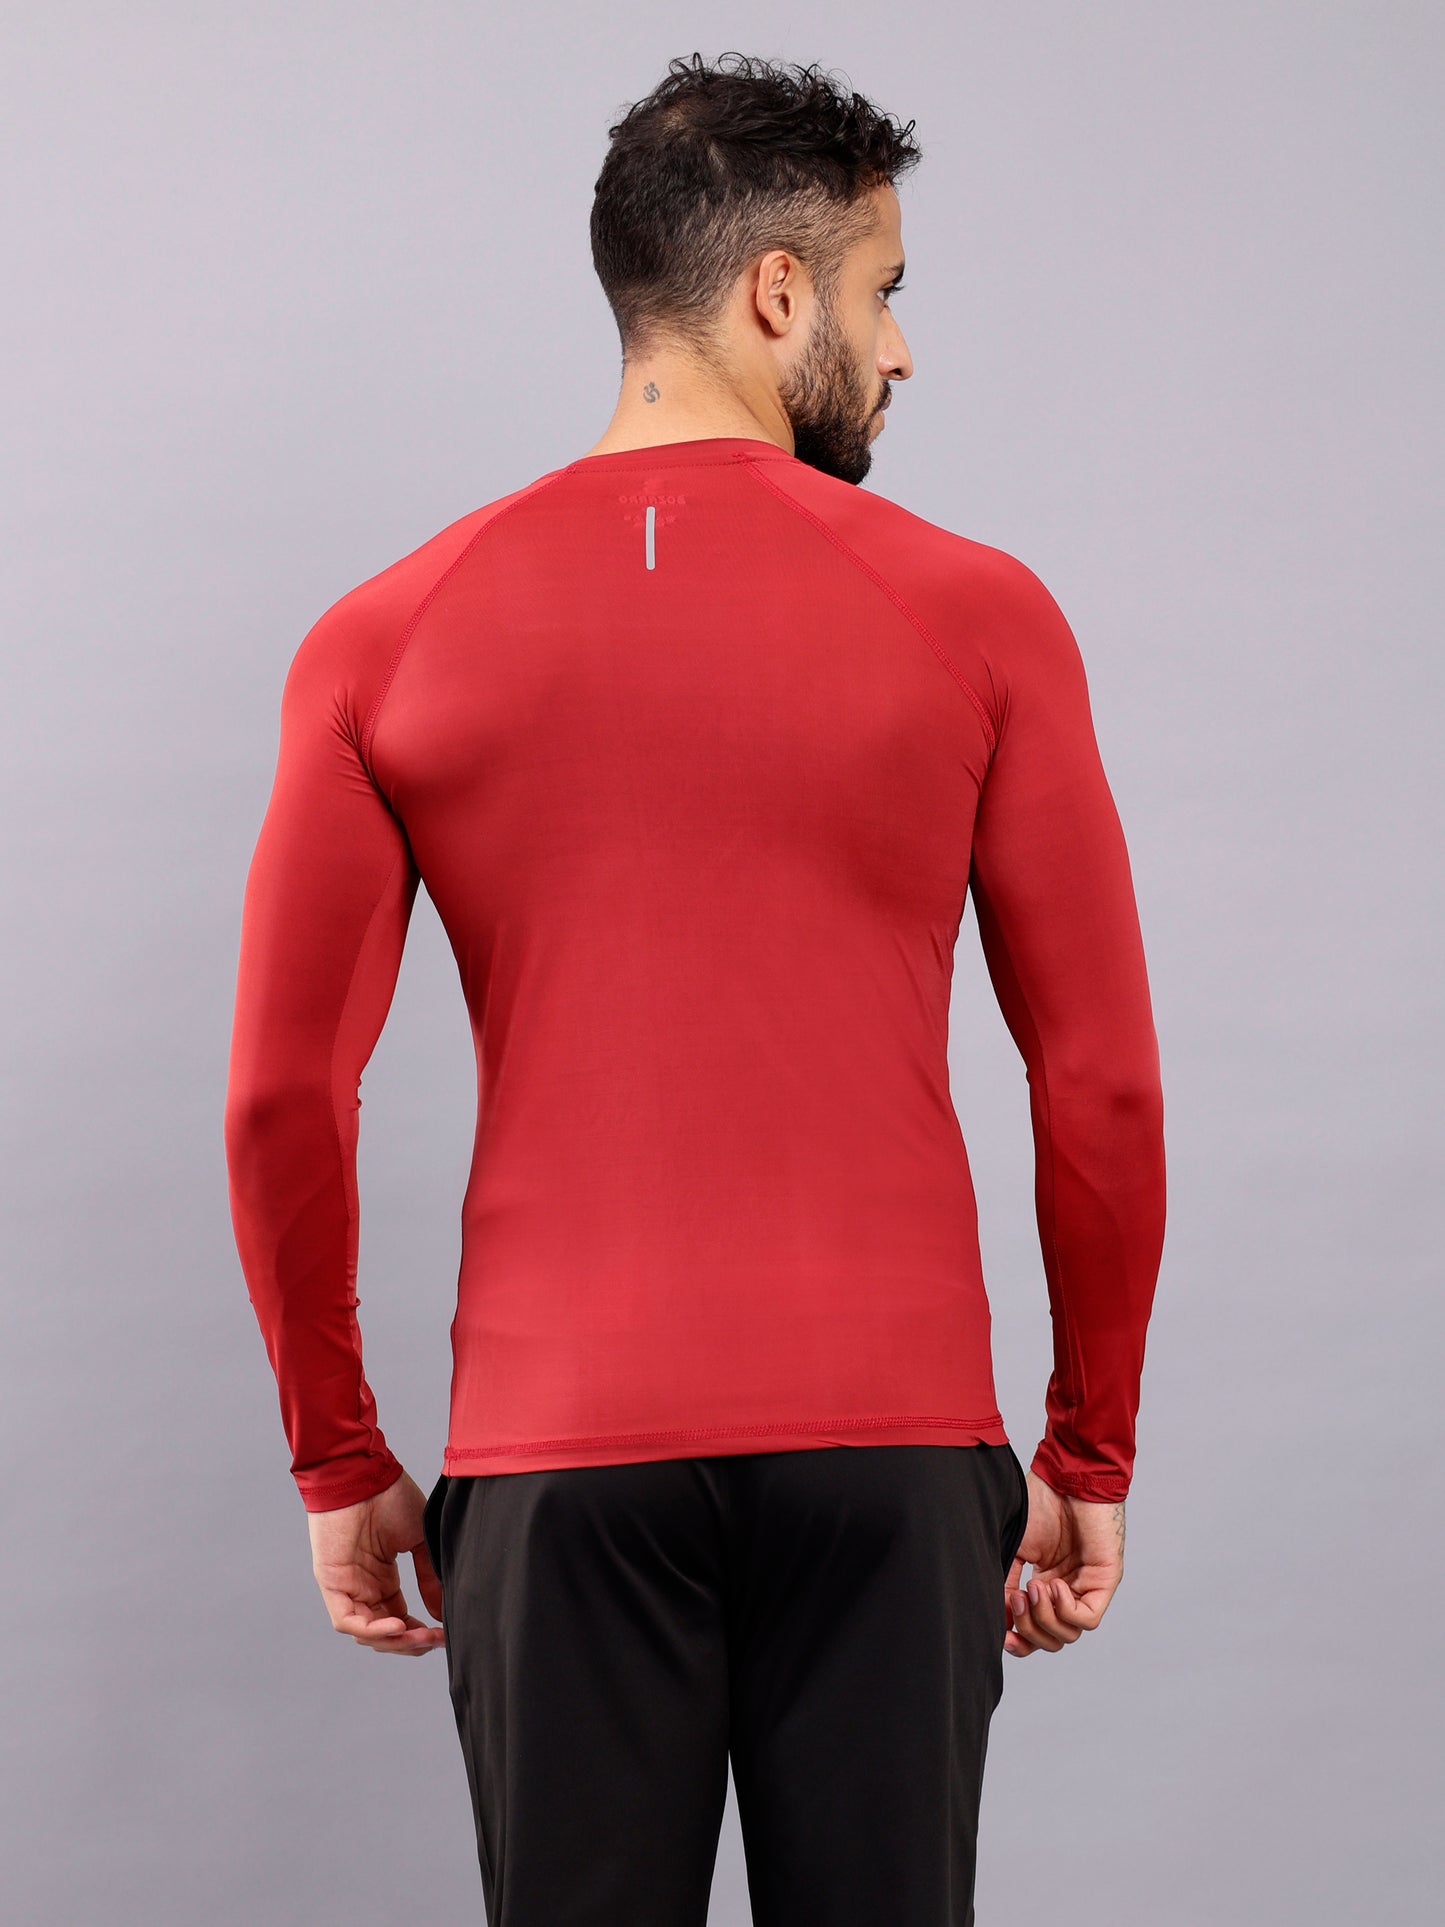 Round neck Compression Full sleeve tshirt-red